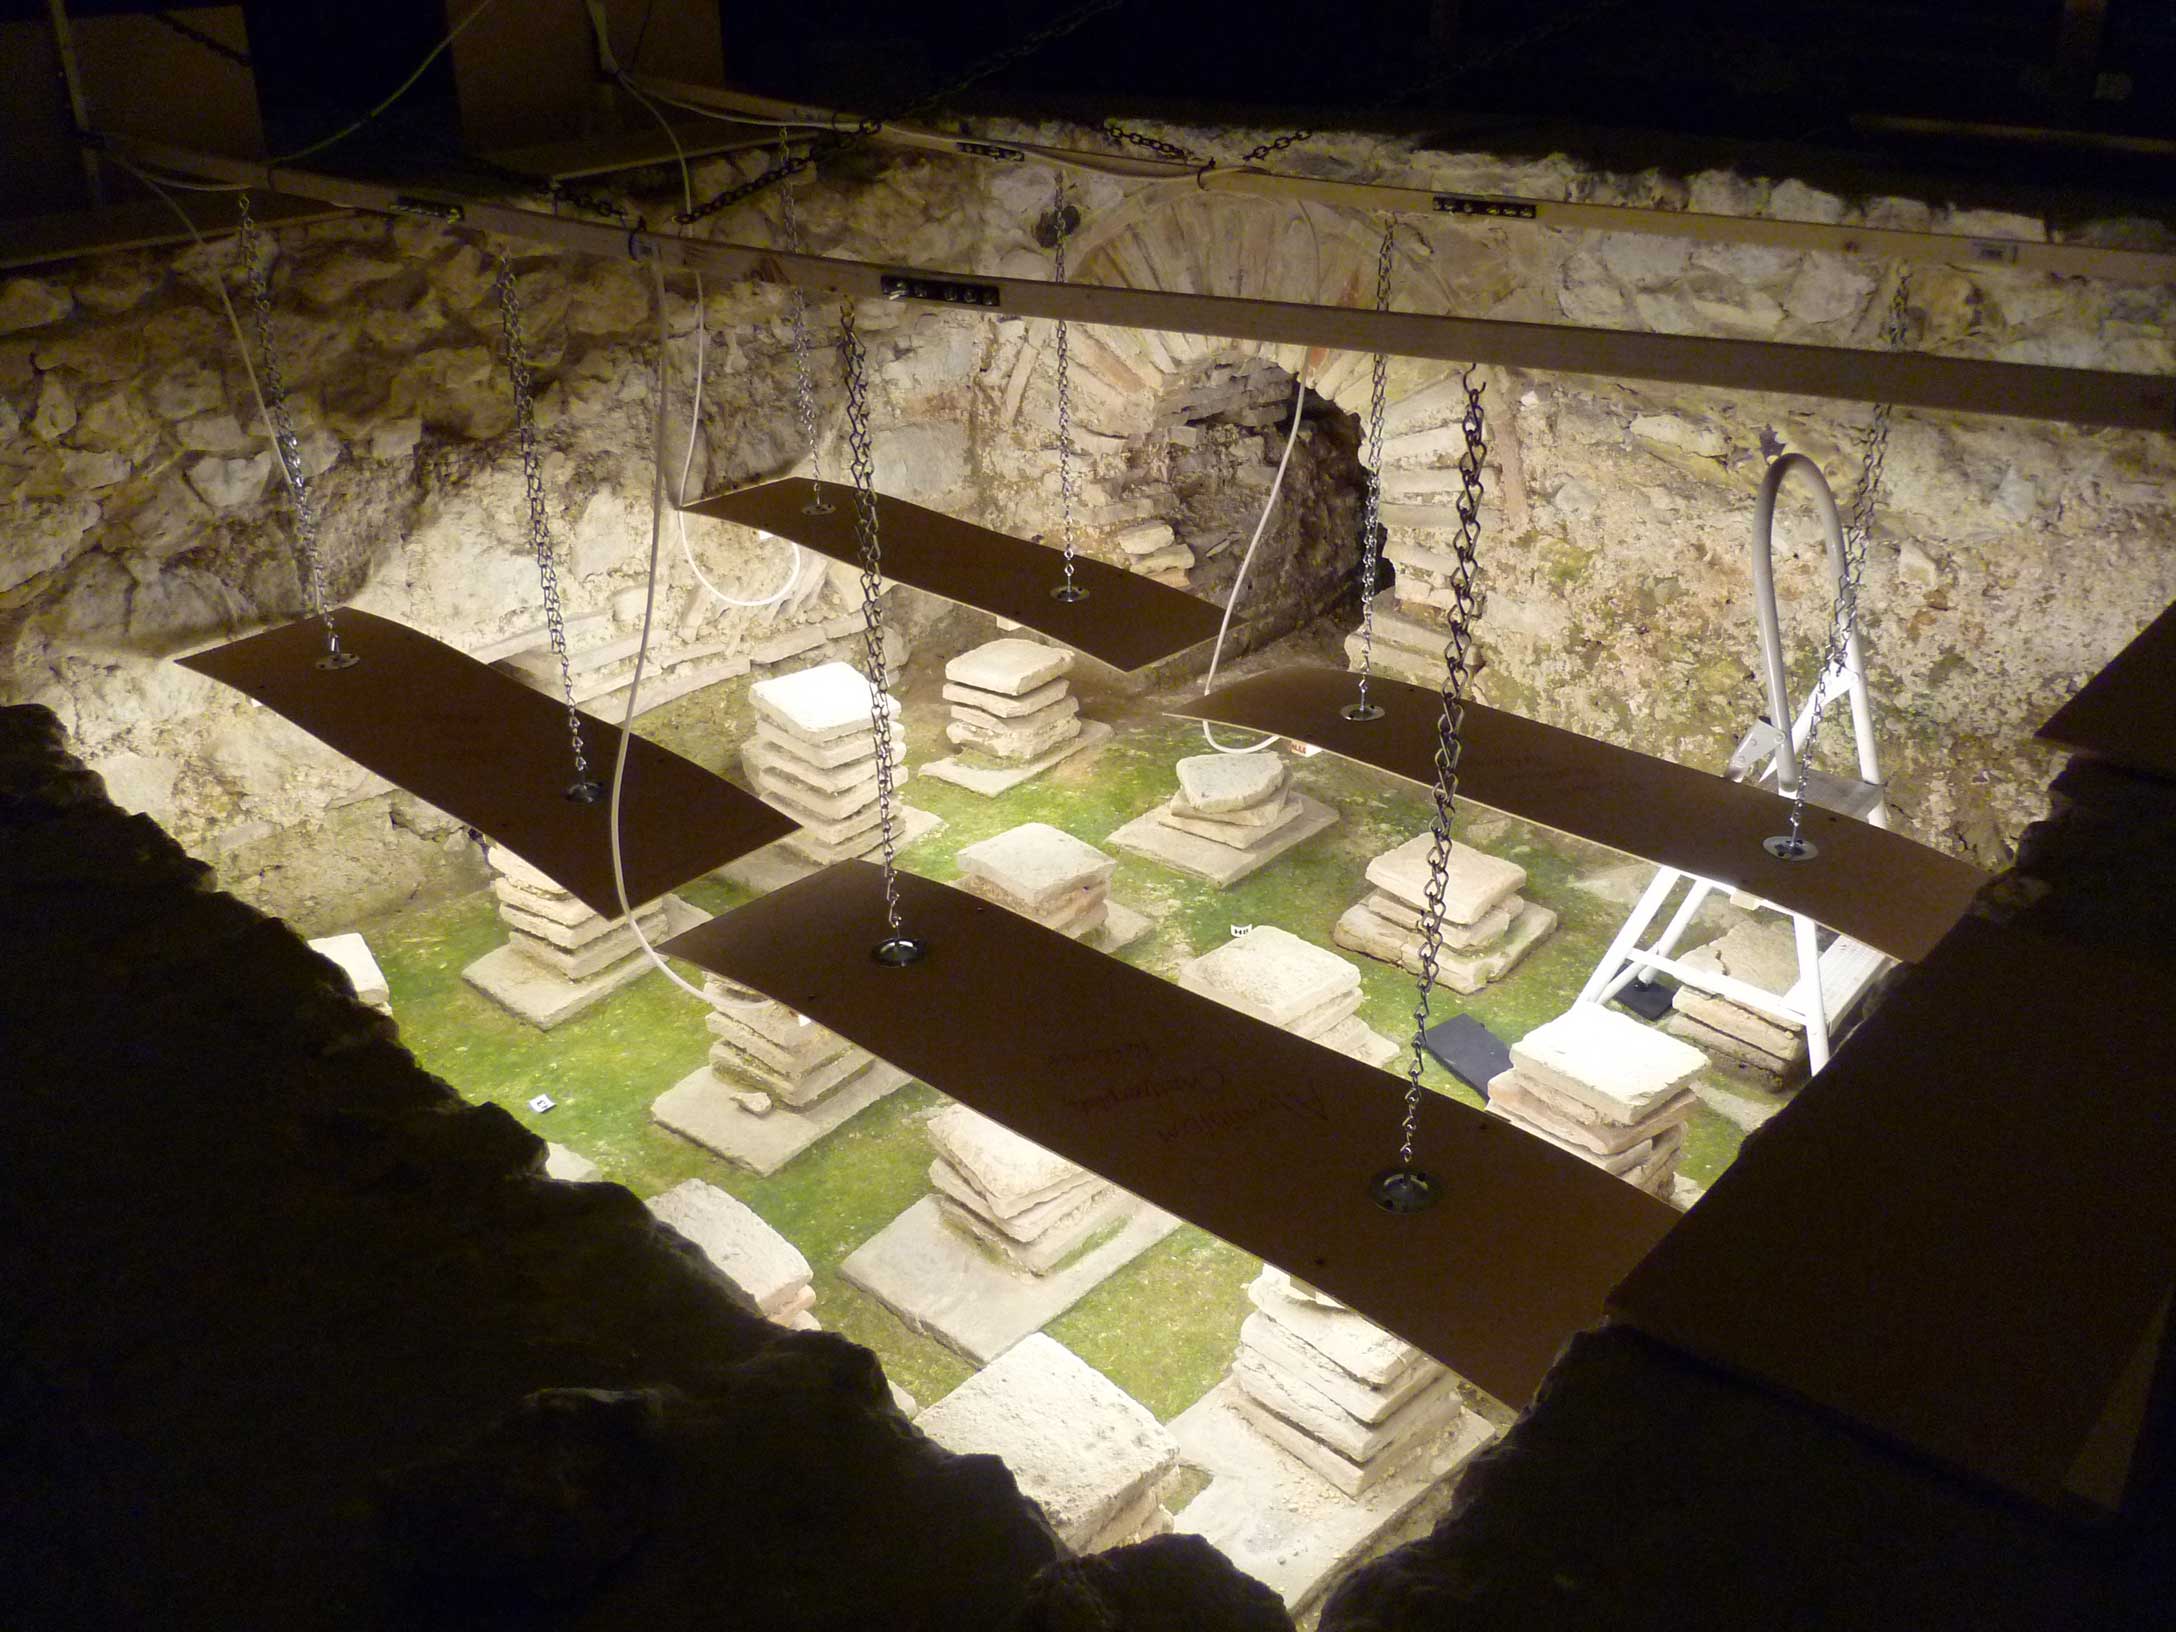 UVC Irradiation equipment suspended above preserved remains of a Roman Villa.